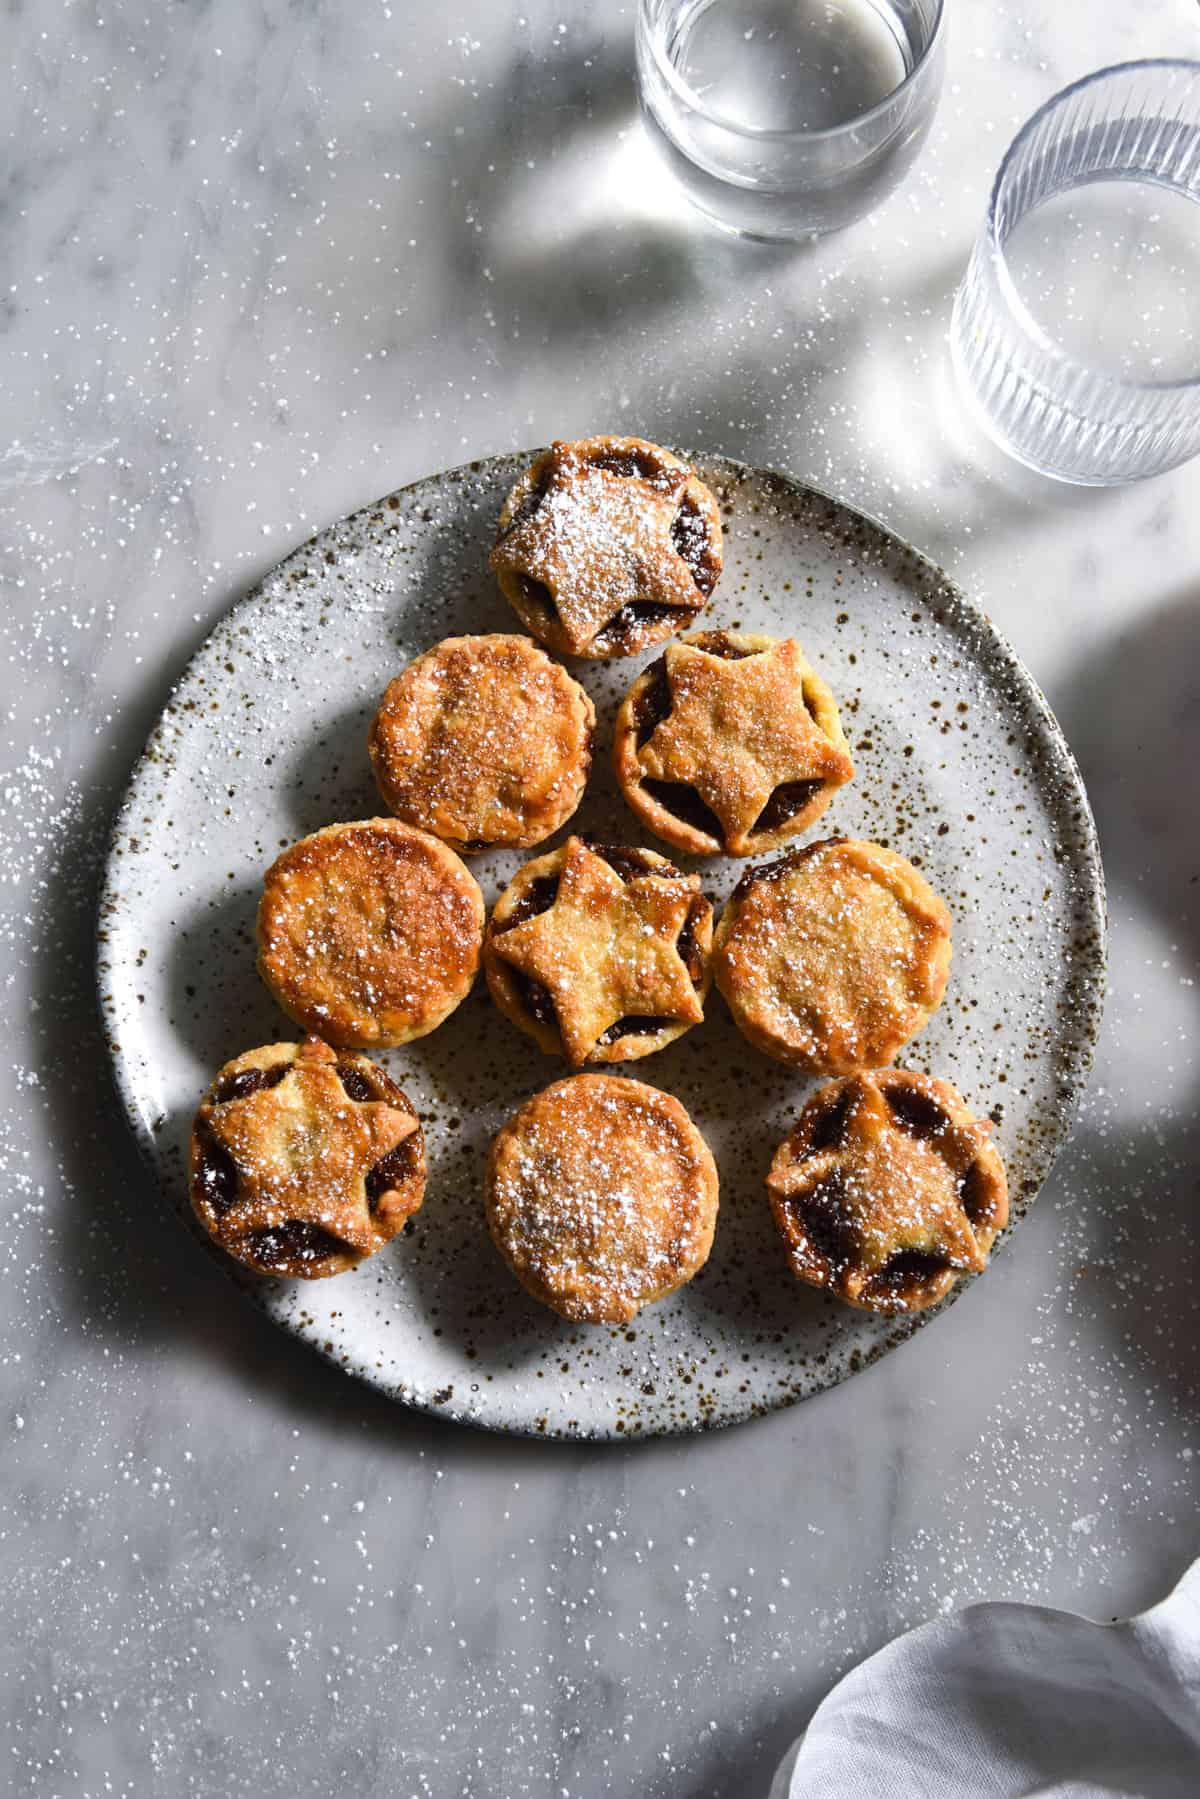 Gluten free, fruit free mince pies arranged in the shape of a Christmas tree on a white speckled ceramic plate atop a white marble table. Some of the mince pies have full pastry tops, and some have cut out star decorations. Glasses of water cast a light and shadow across the right hand side of the image